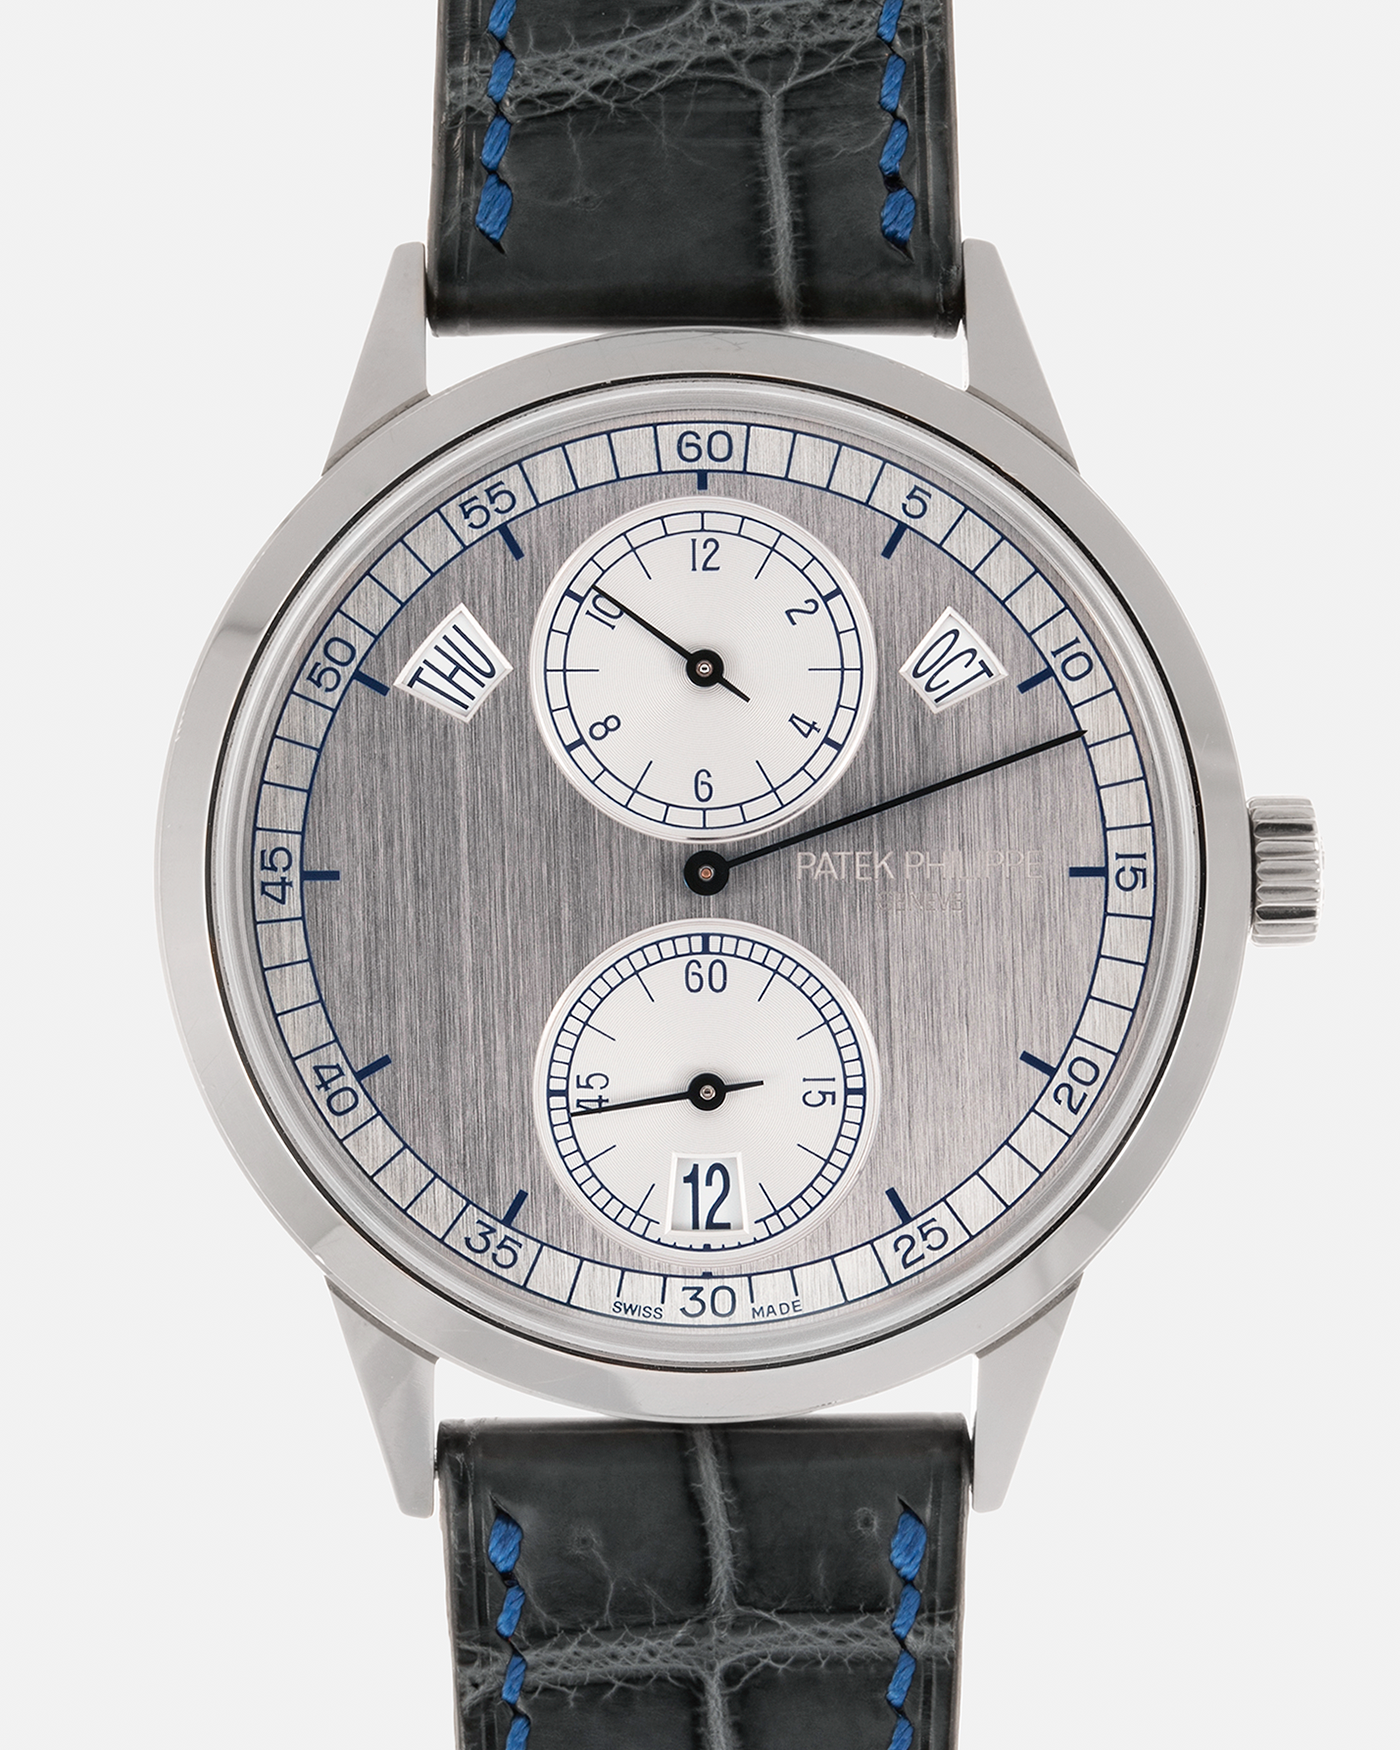 Brand: Patek Philippe Year: 2018 Model: Regulator Annual Calendar Reference Number: 5235G Material: 18-carat White Gold Movement: Patek Philippe Cal. 31-260 REG QA, Self-Winding Case Diameter: 40.5mm Lug Width: 20mm Strap: Dream Rocketeers Grey Alligator Leather Strap with Blue Contrasting Stitching with Signed 18-carat White Gold Tang Buckle, and additional Patek Philippe Black Alligator Leather Strap